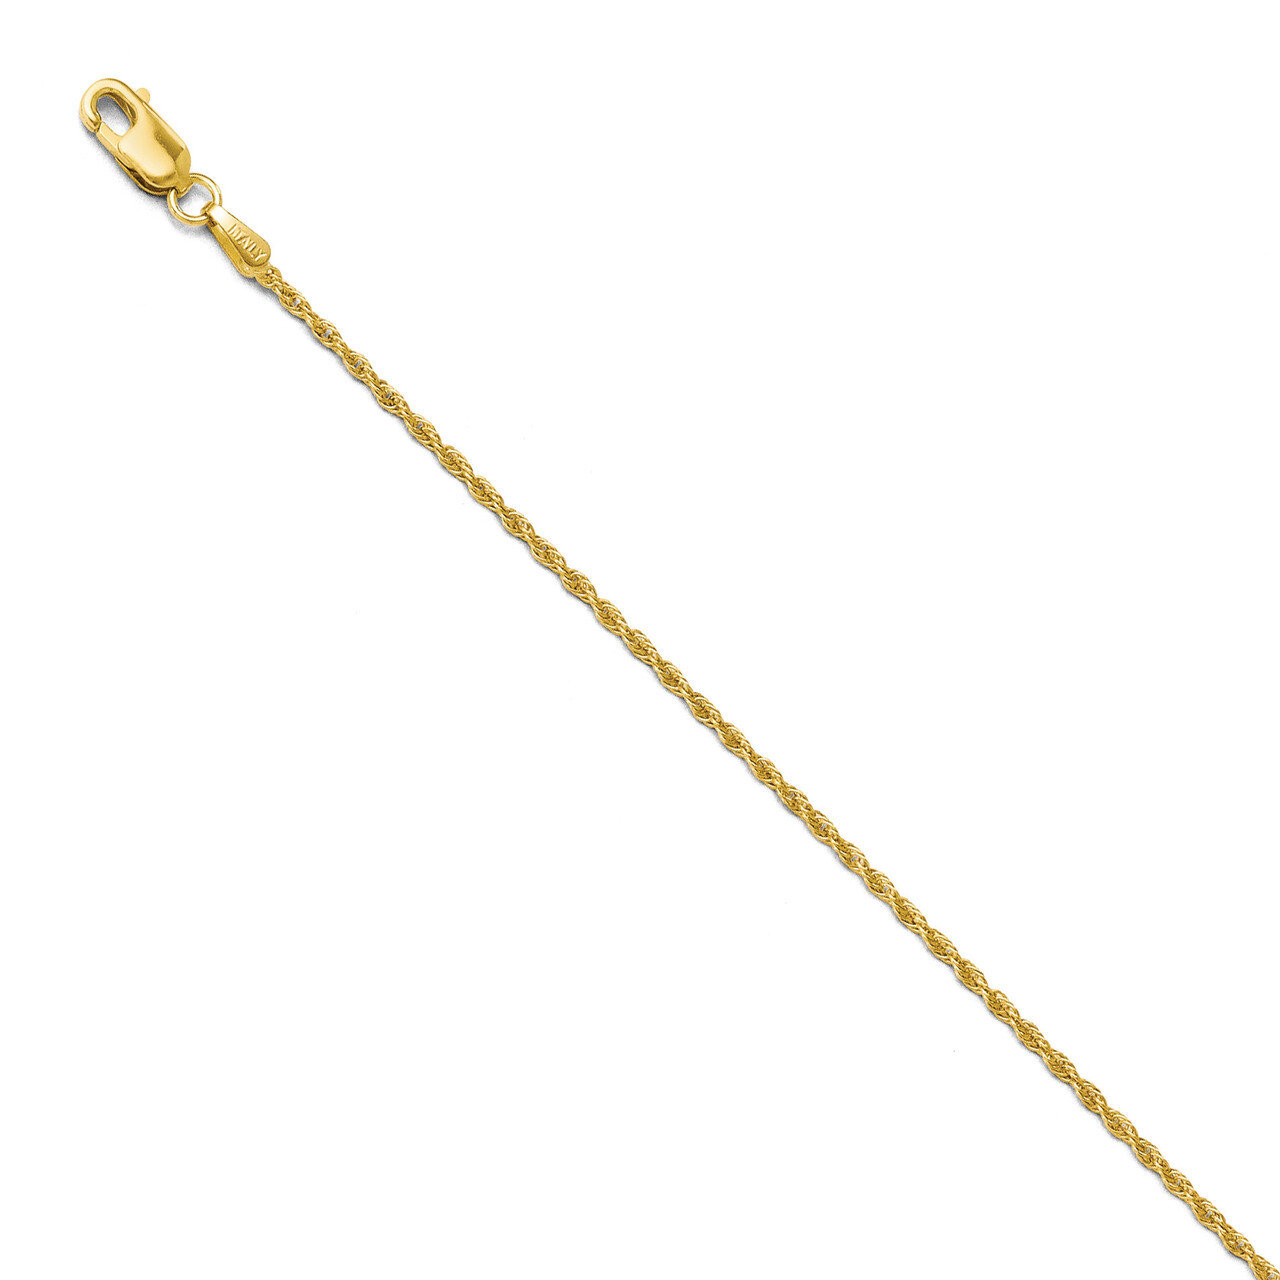 Pendant Rope Chain 20 Inch - 14k Gold HB-727-20